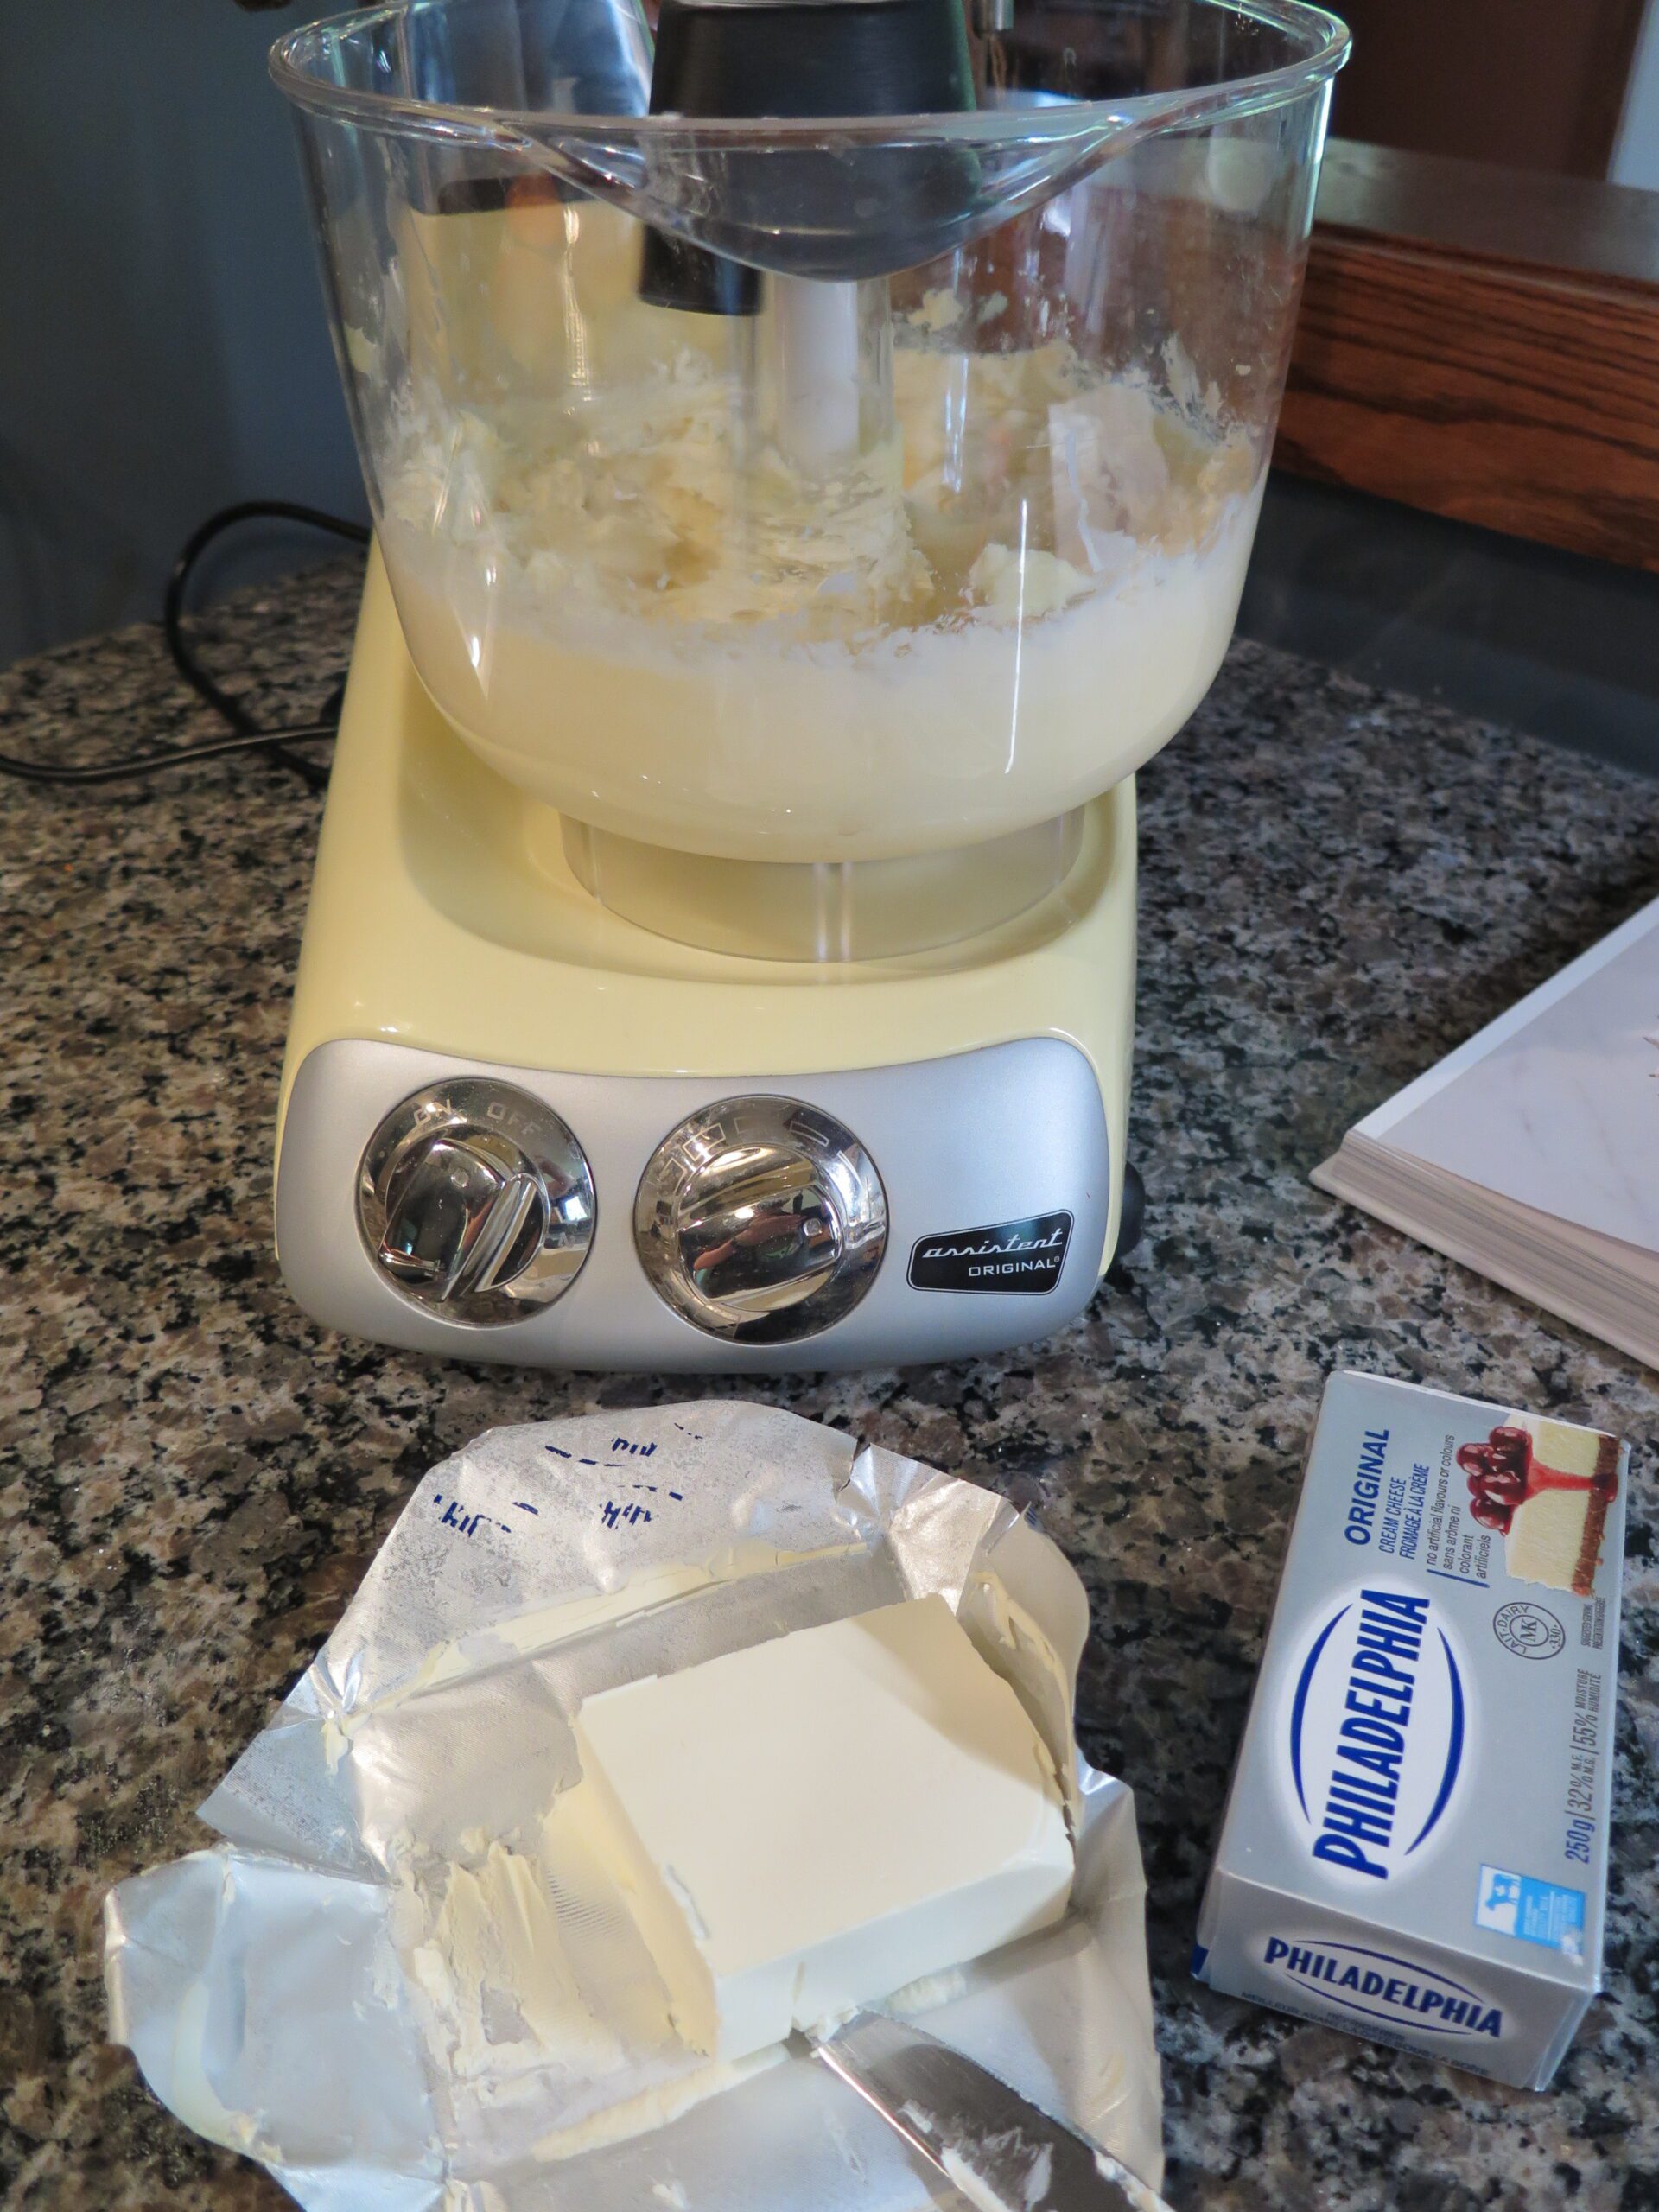 Cream cheese added to whipped butter in ankarsrum mixer